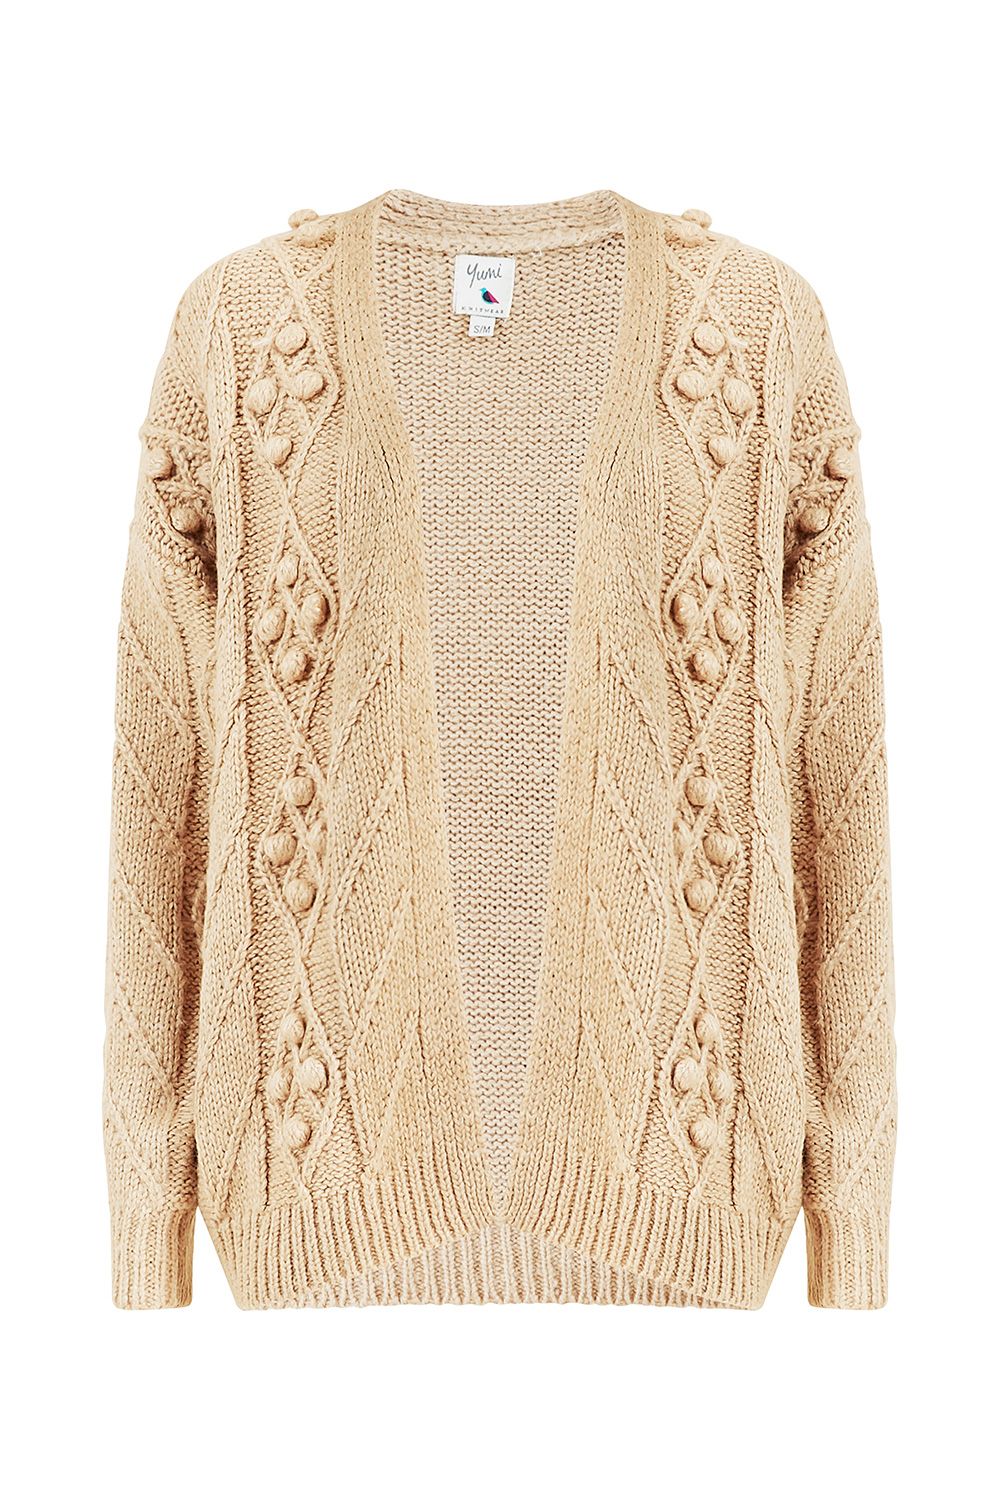 A classic cardigan with a twist, this Yumi Beige Pom Pom Knitted Cardigan will elevate your knitwear game. Look effortlessly cute in this playful cardigan with statement pompoms. With ribbed cuffs and hemline and a super soft, diamond pattern knit, this piece is the perfect neutral autumn essential.